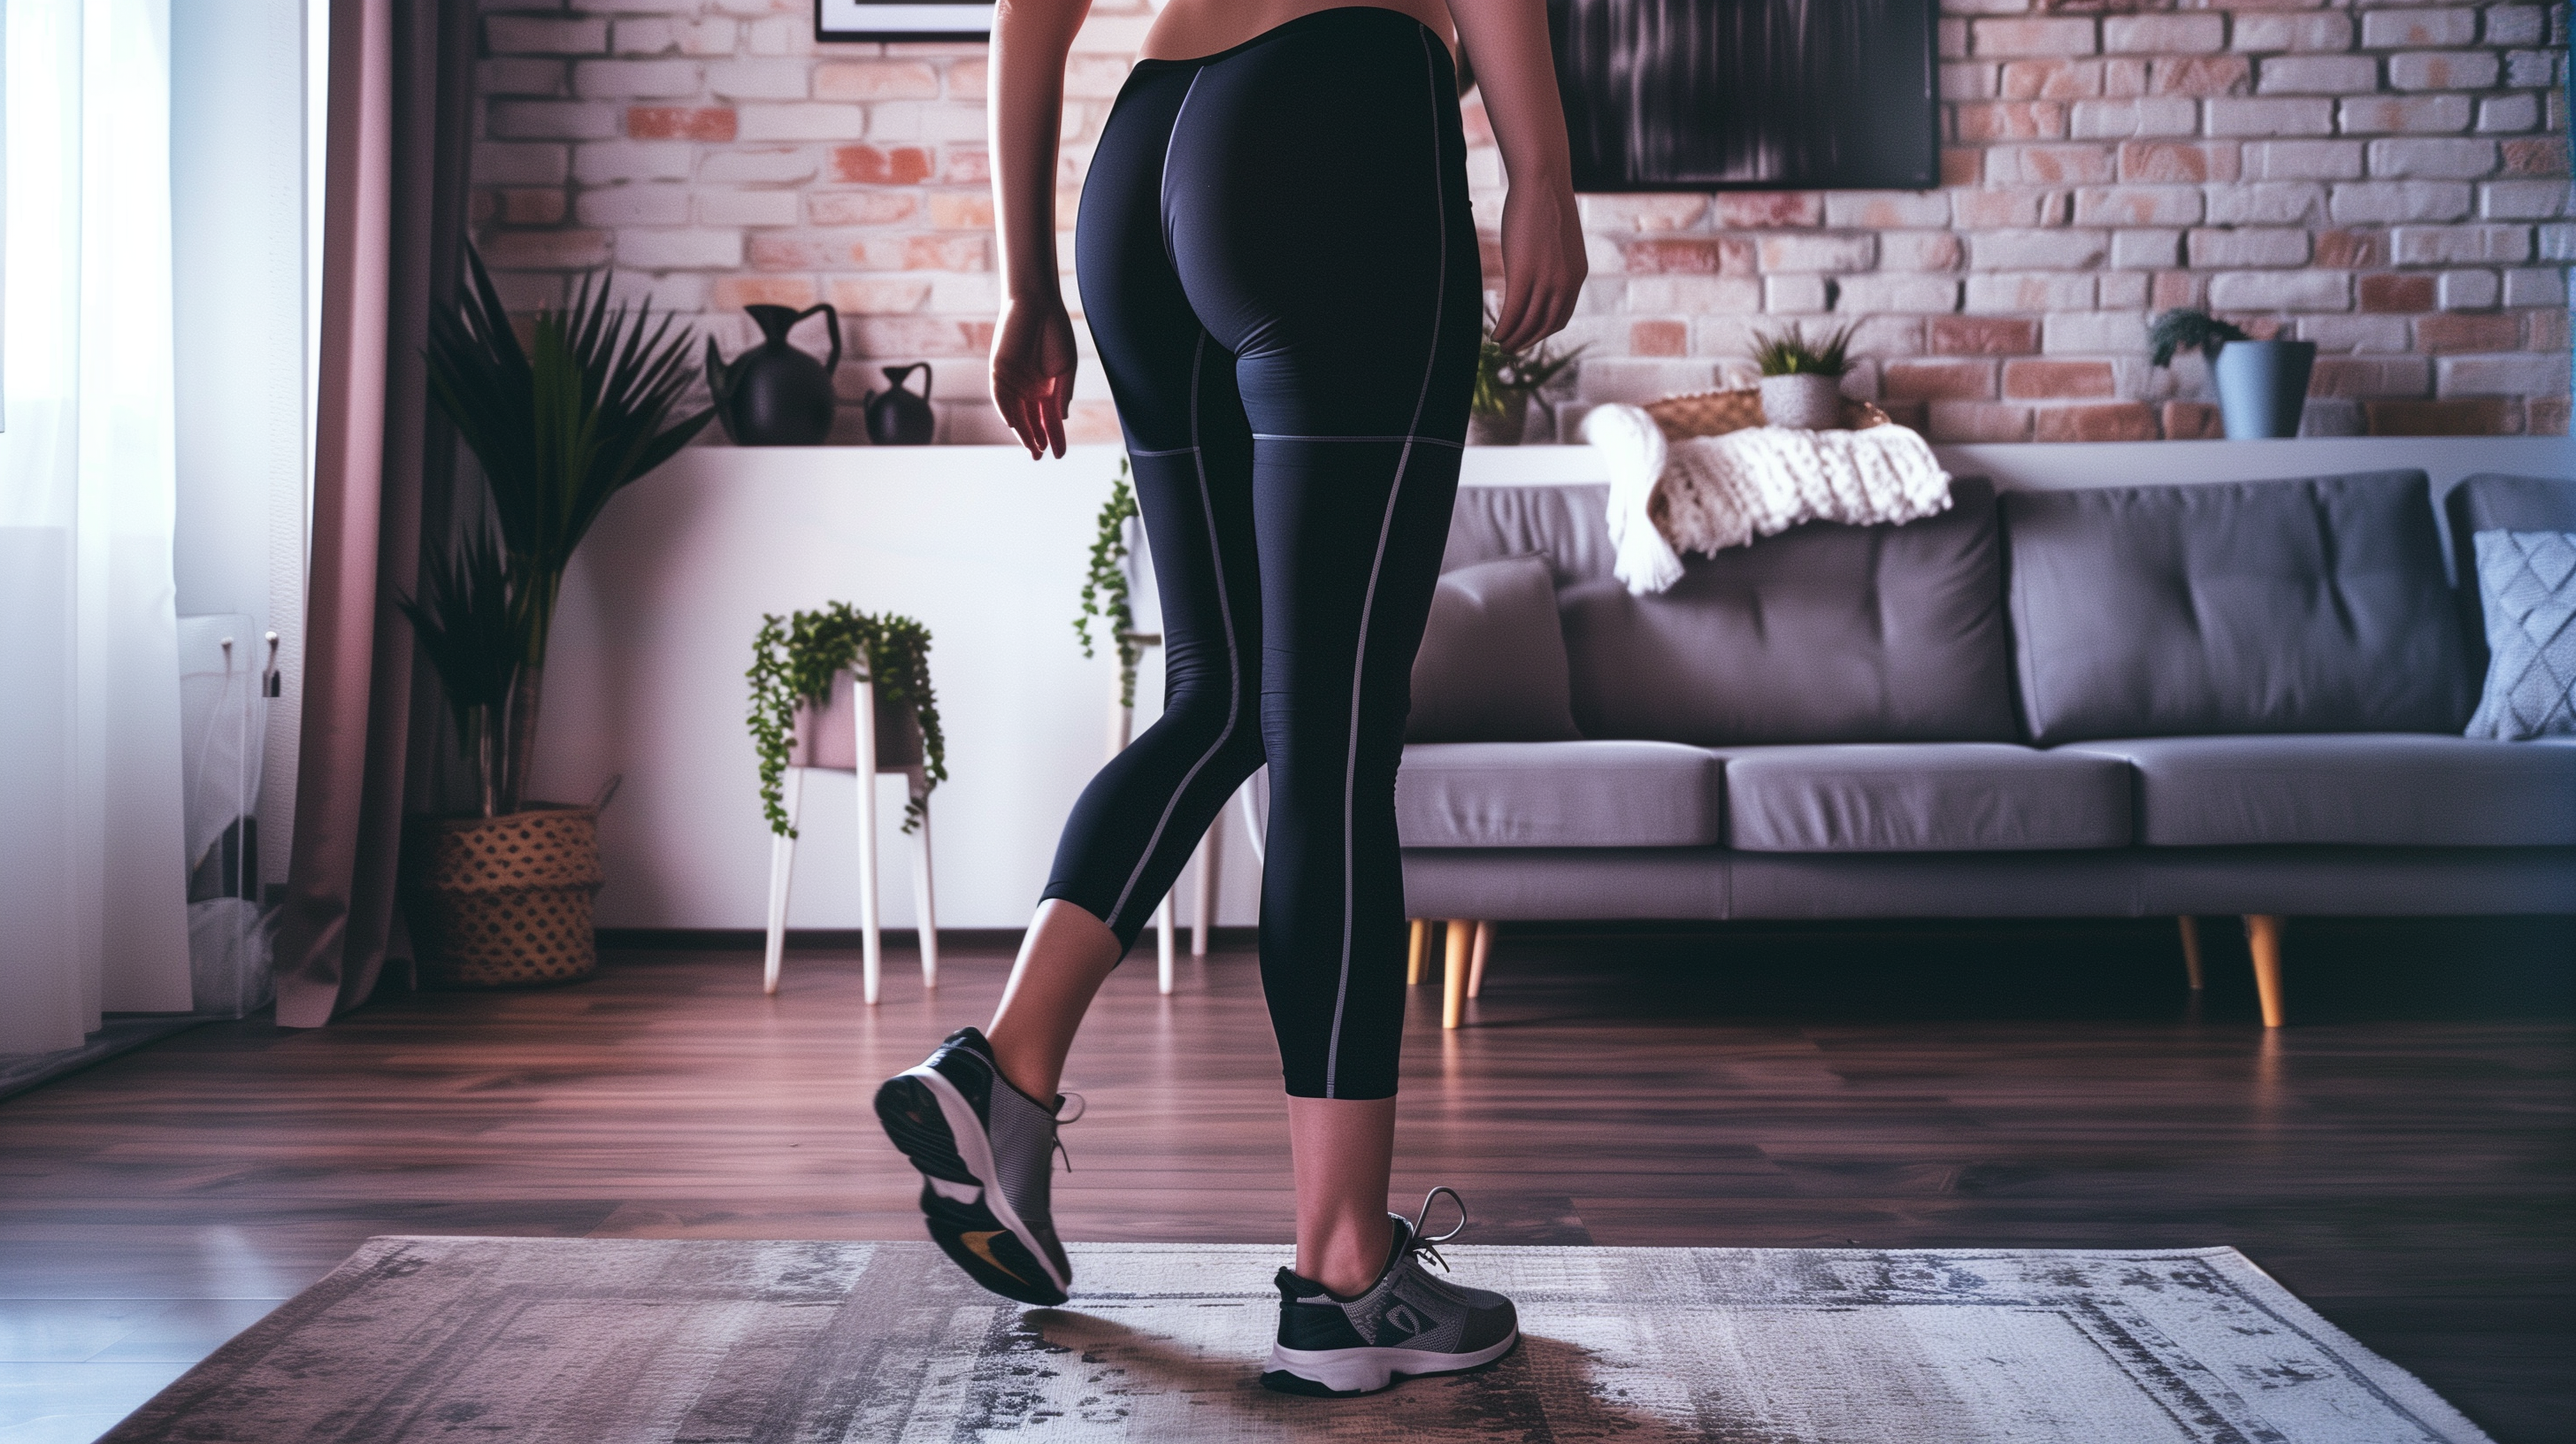 a waist down photo of a woman in work-out tights, standing in her living room about to workout